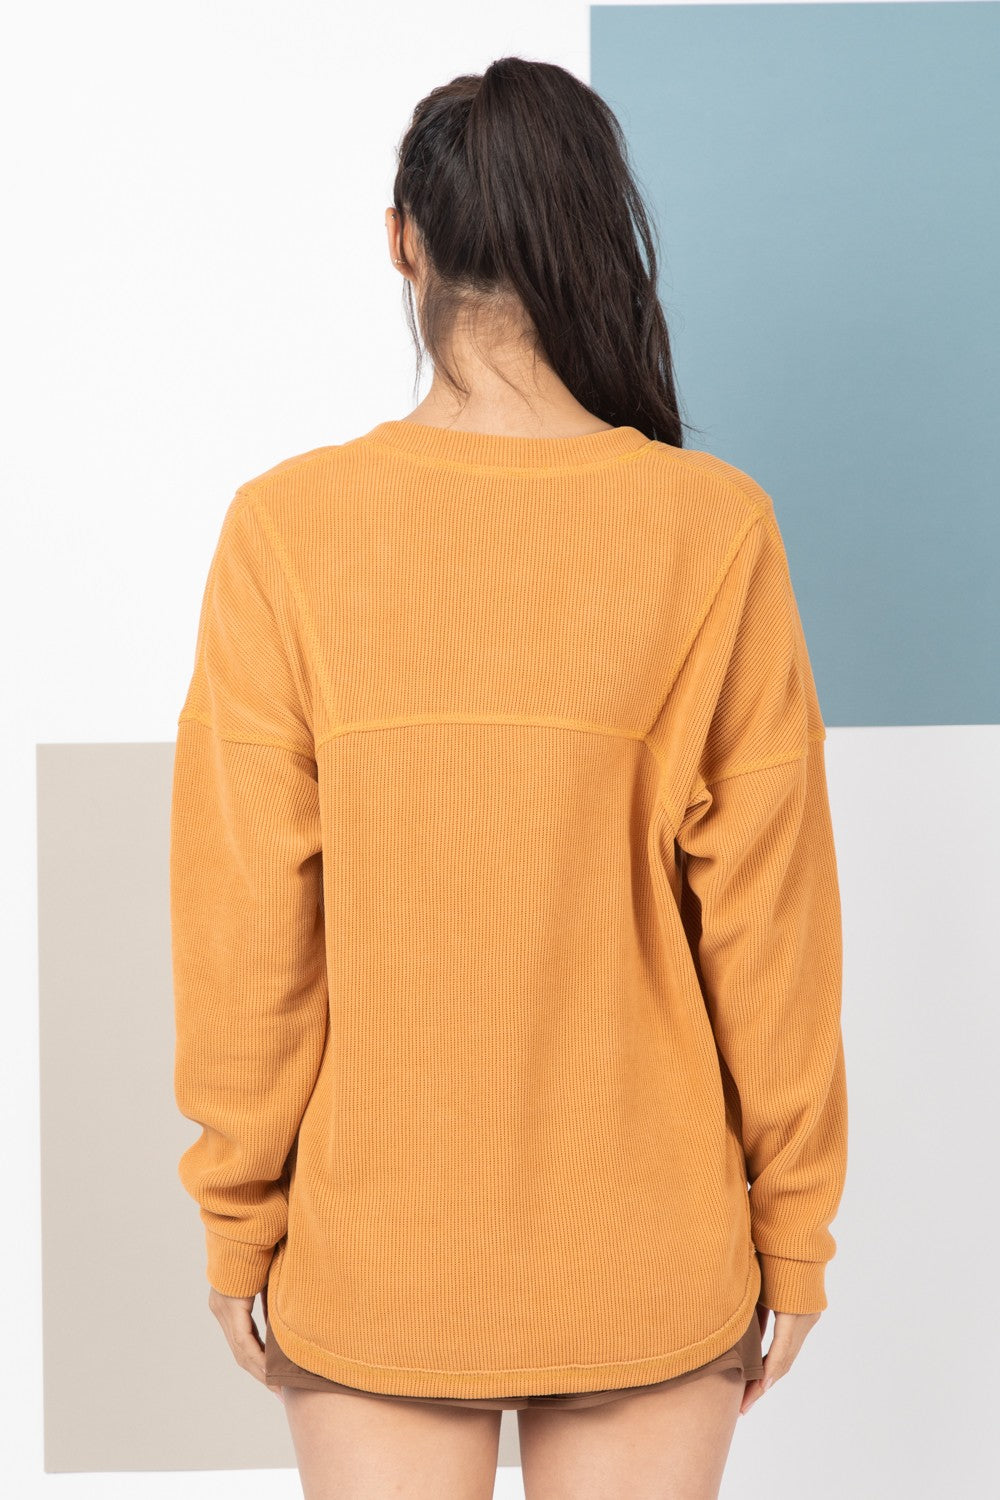 Casey Oversized Solid Color Comfy Knit Top in Camel